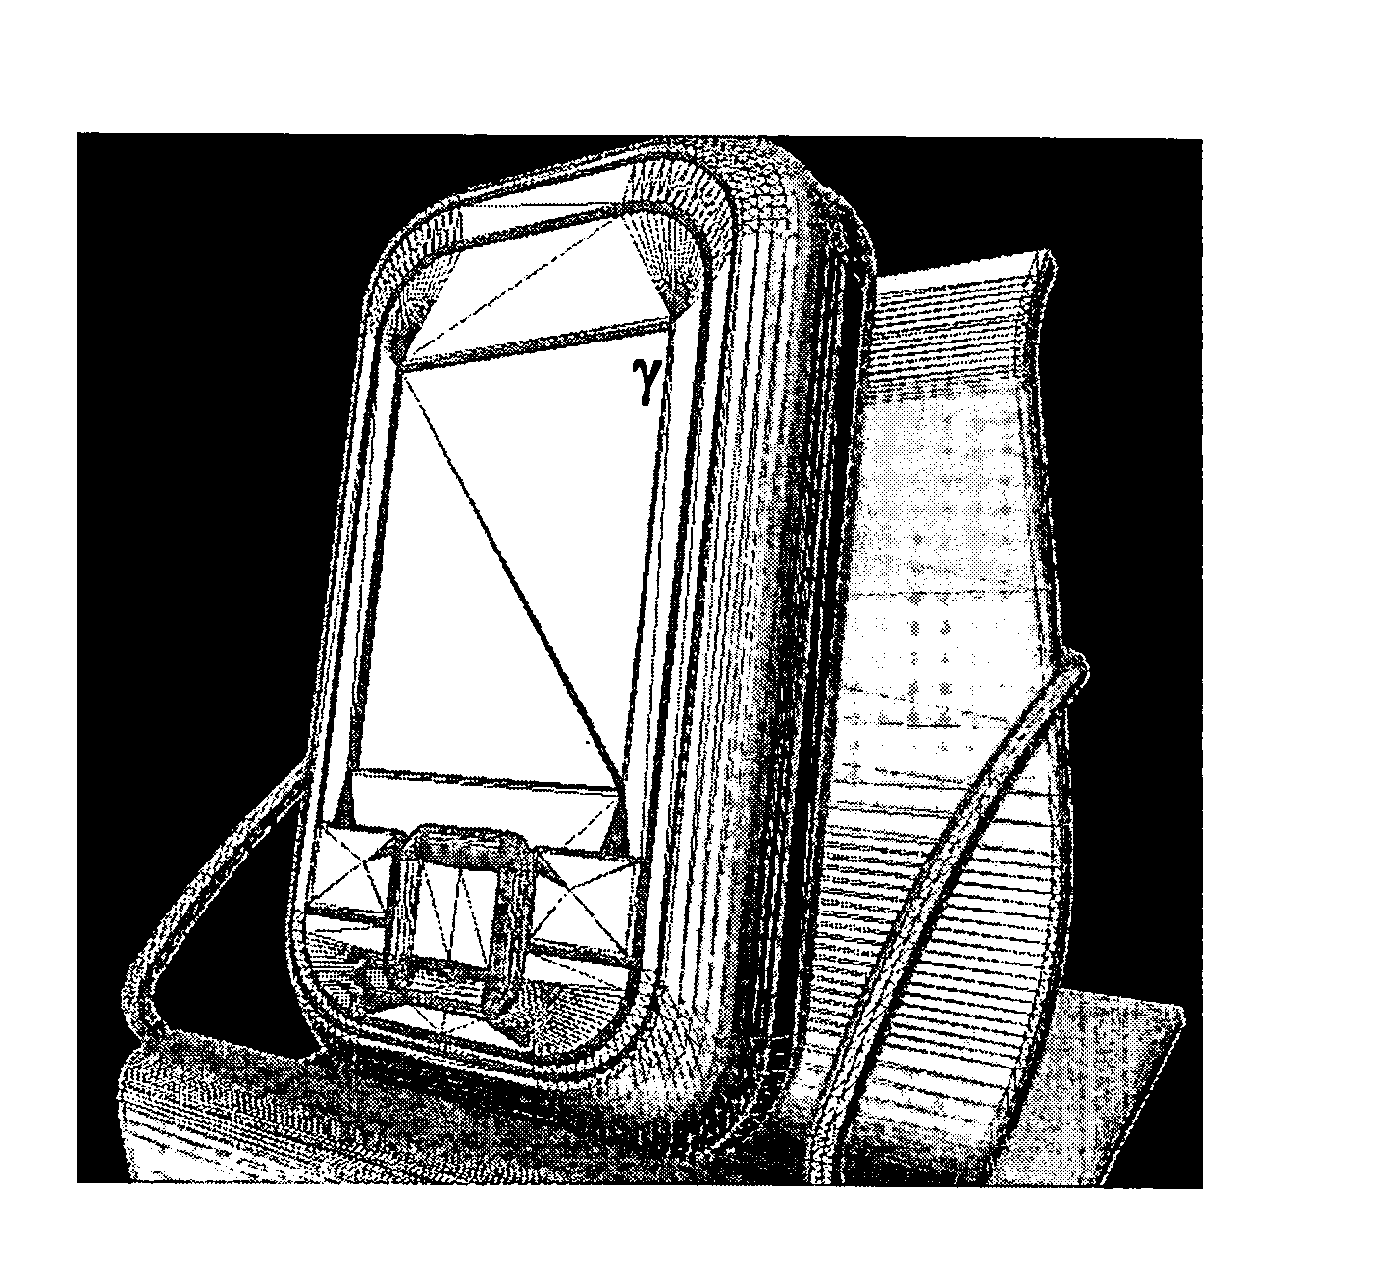 Method for encoding/decoding a 3D mesh model that comprises one or more components